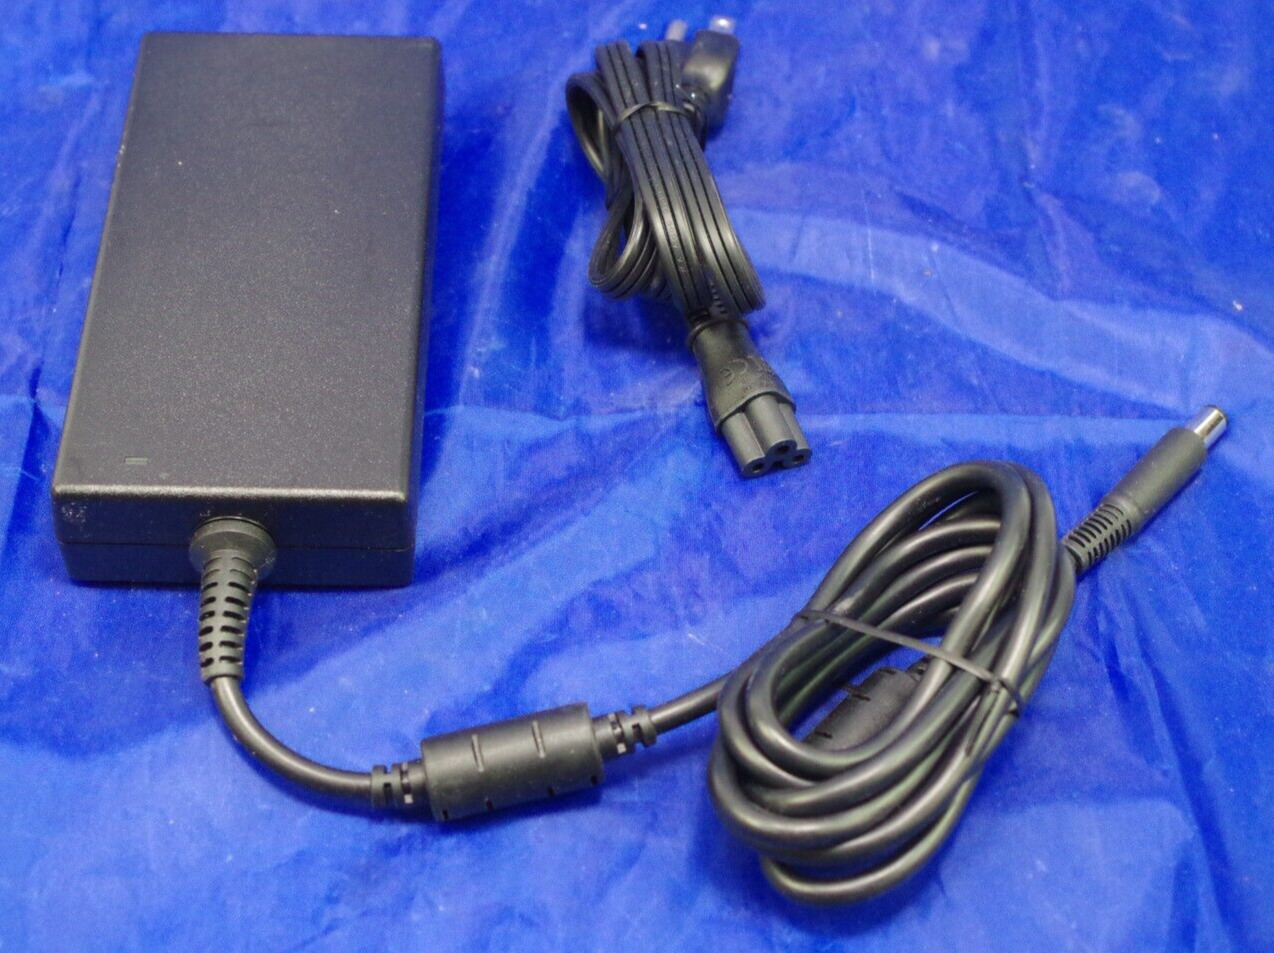 Genuine Dell WD19TB Thunderbolt 3 USB-C Docking Station 180W AC Adapter Charger